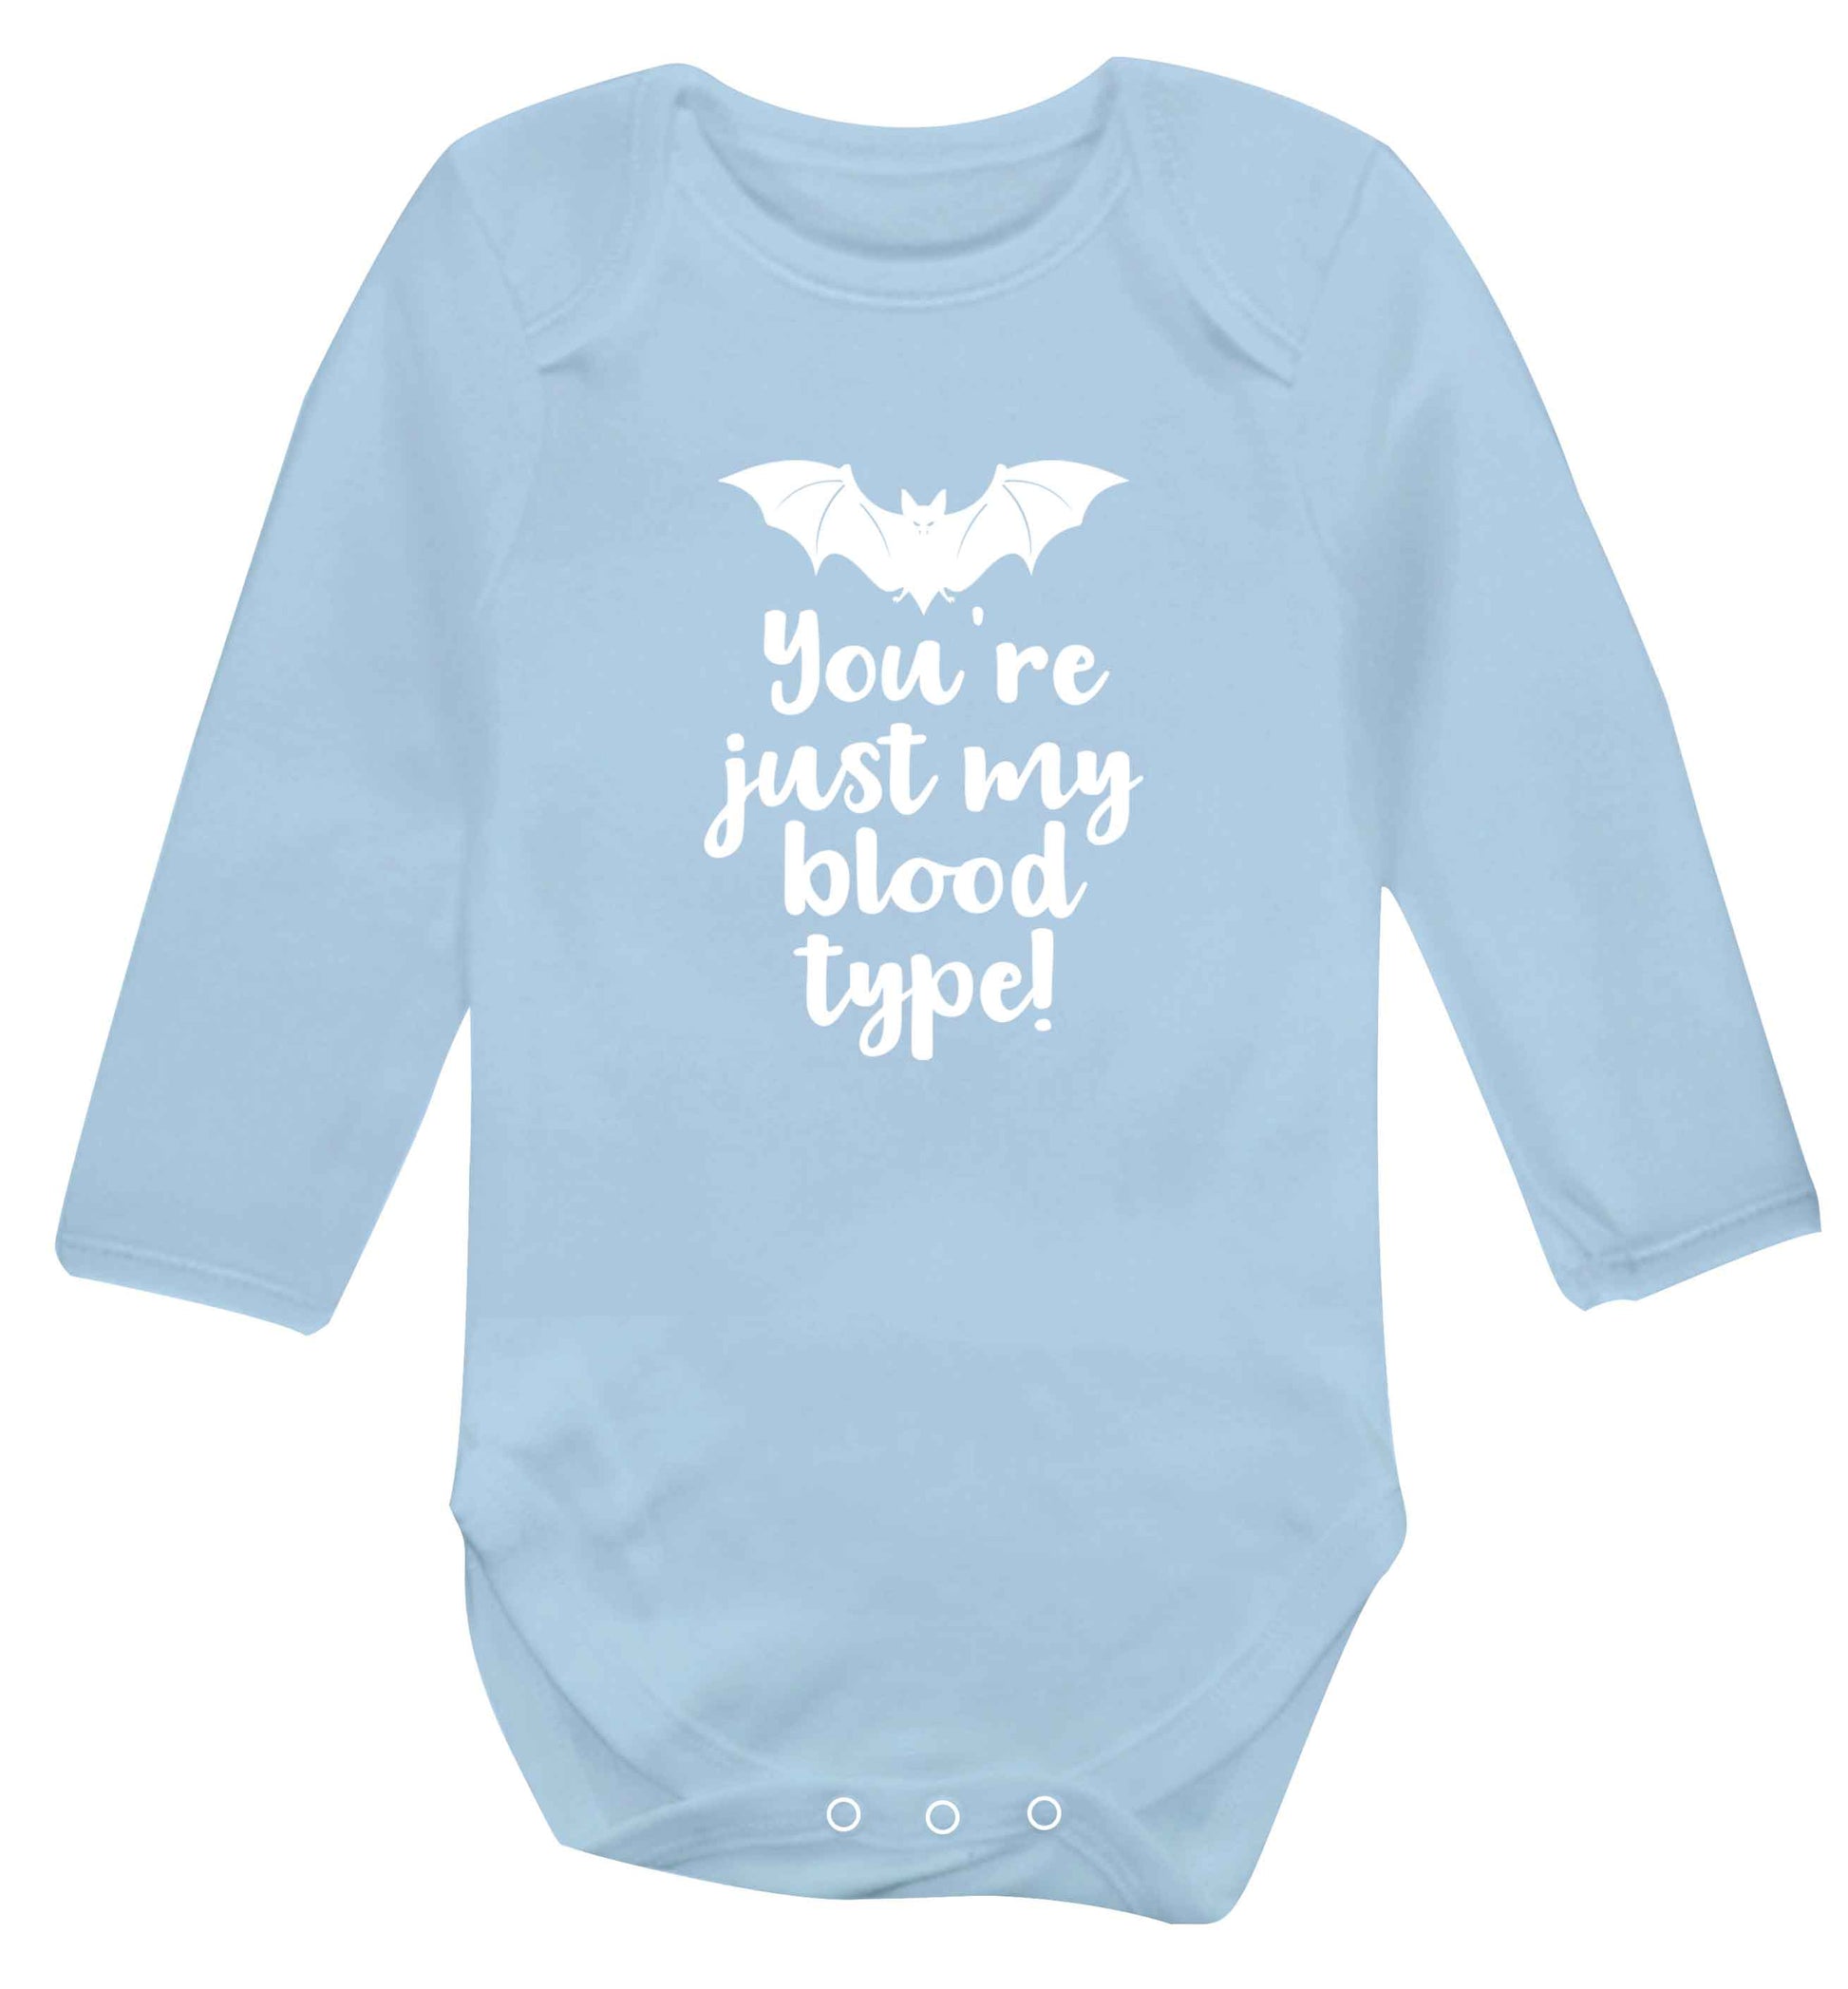 You're just my blood type baby vest long sleeved pale blue 6-12 months